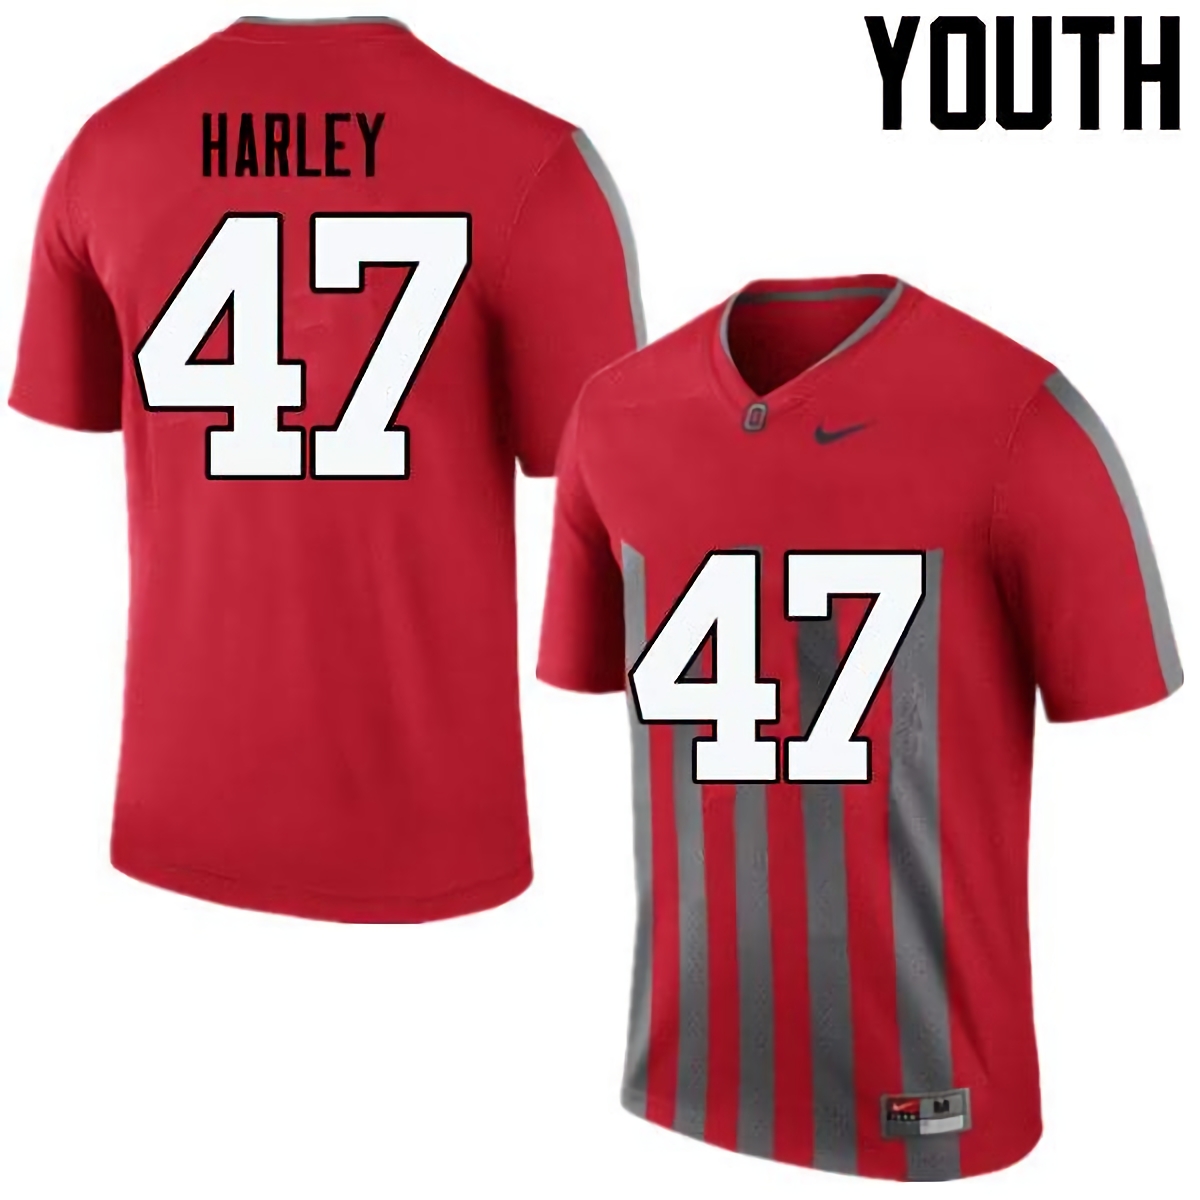 Chic Harley Ohio State Buckeyes Youth NCAA #47 Nike Throwback Red College Stitched Football Jersey WJB7156SG